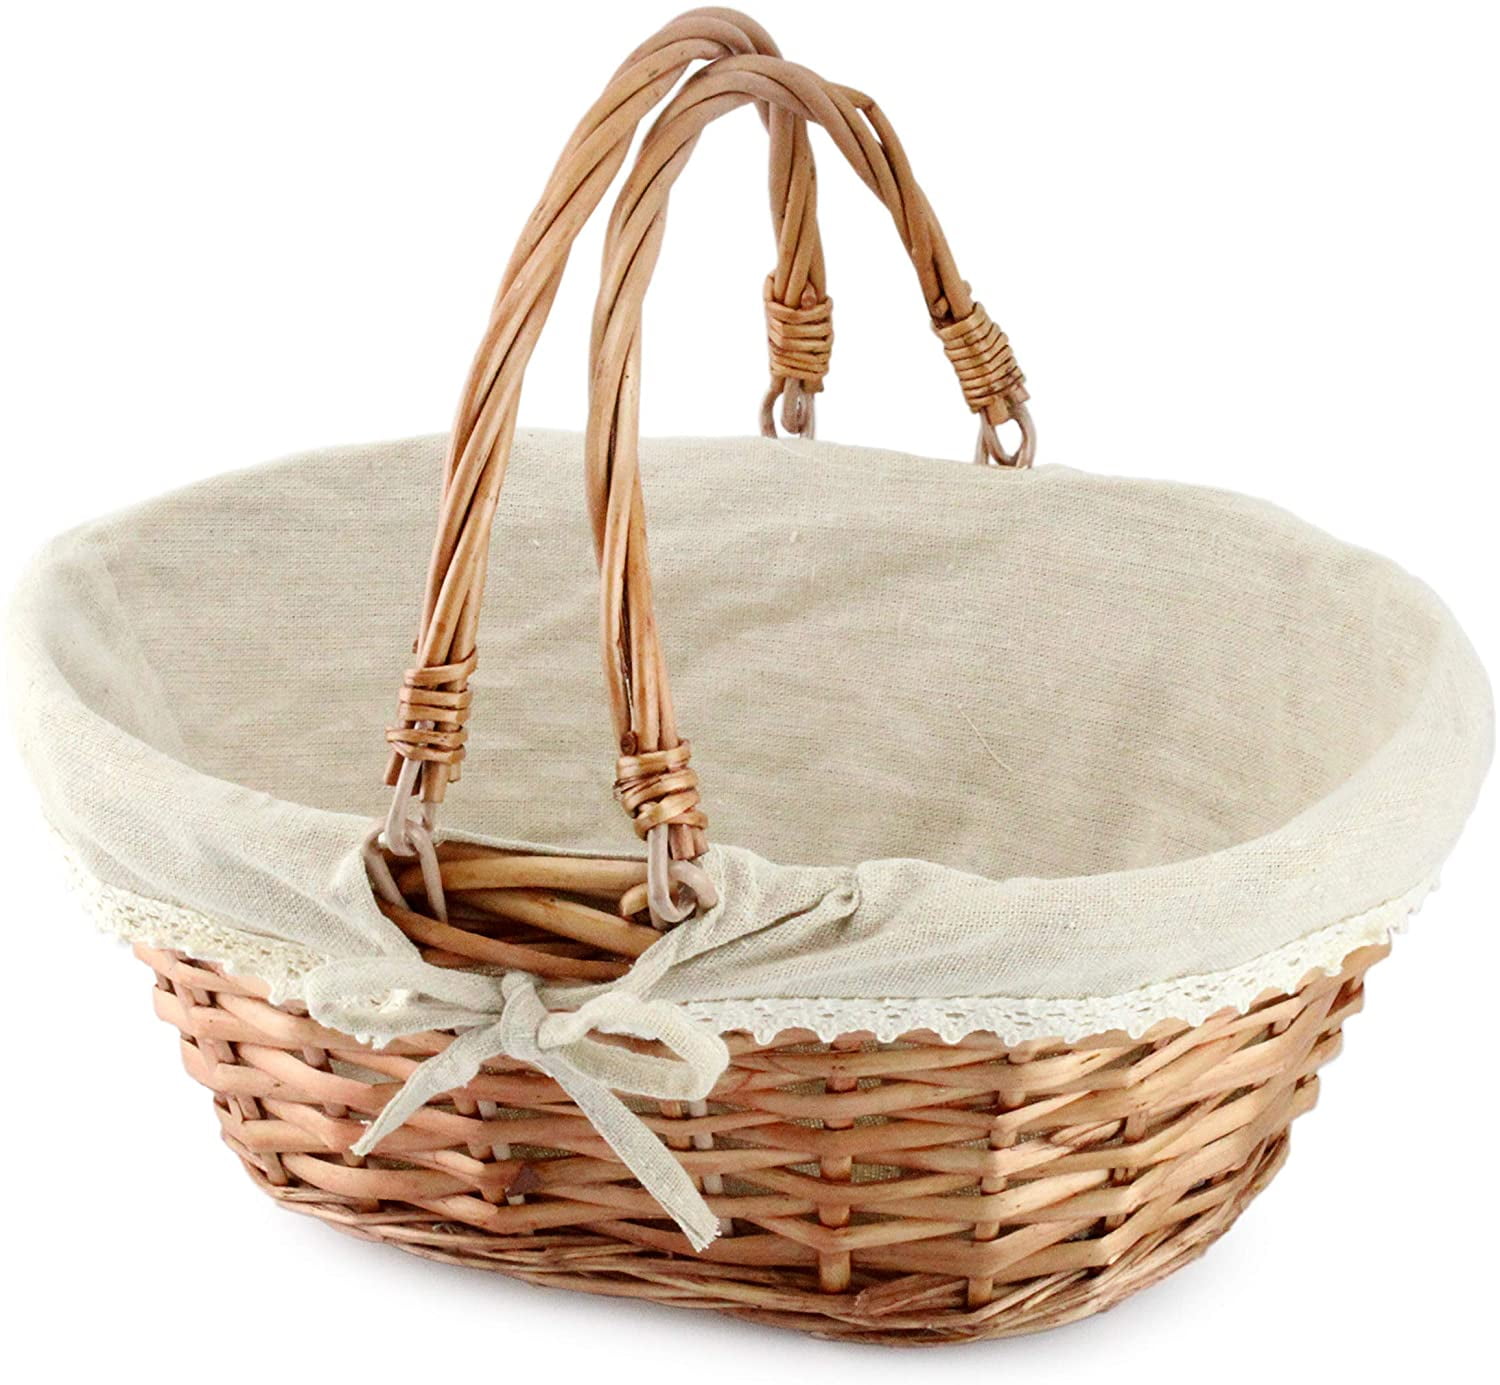 10 x Oval Wicker Gift Basket Packing Tray Storage with Handles NATURAL 